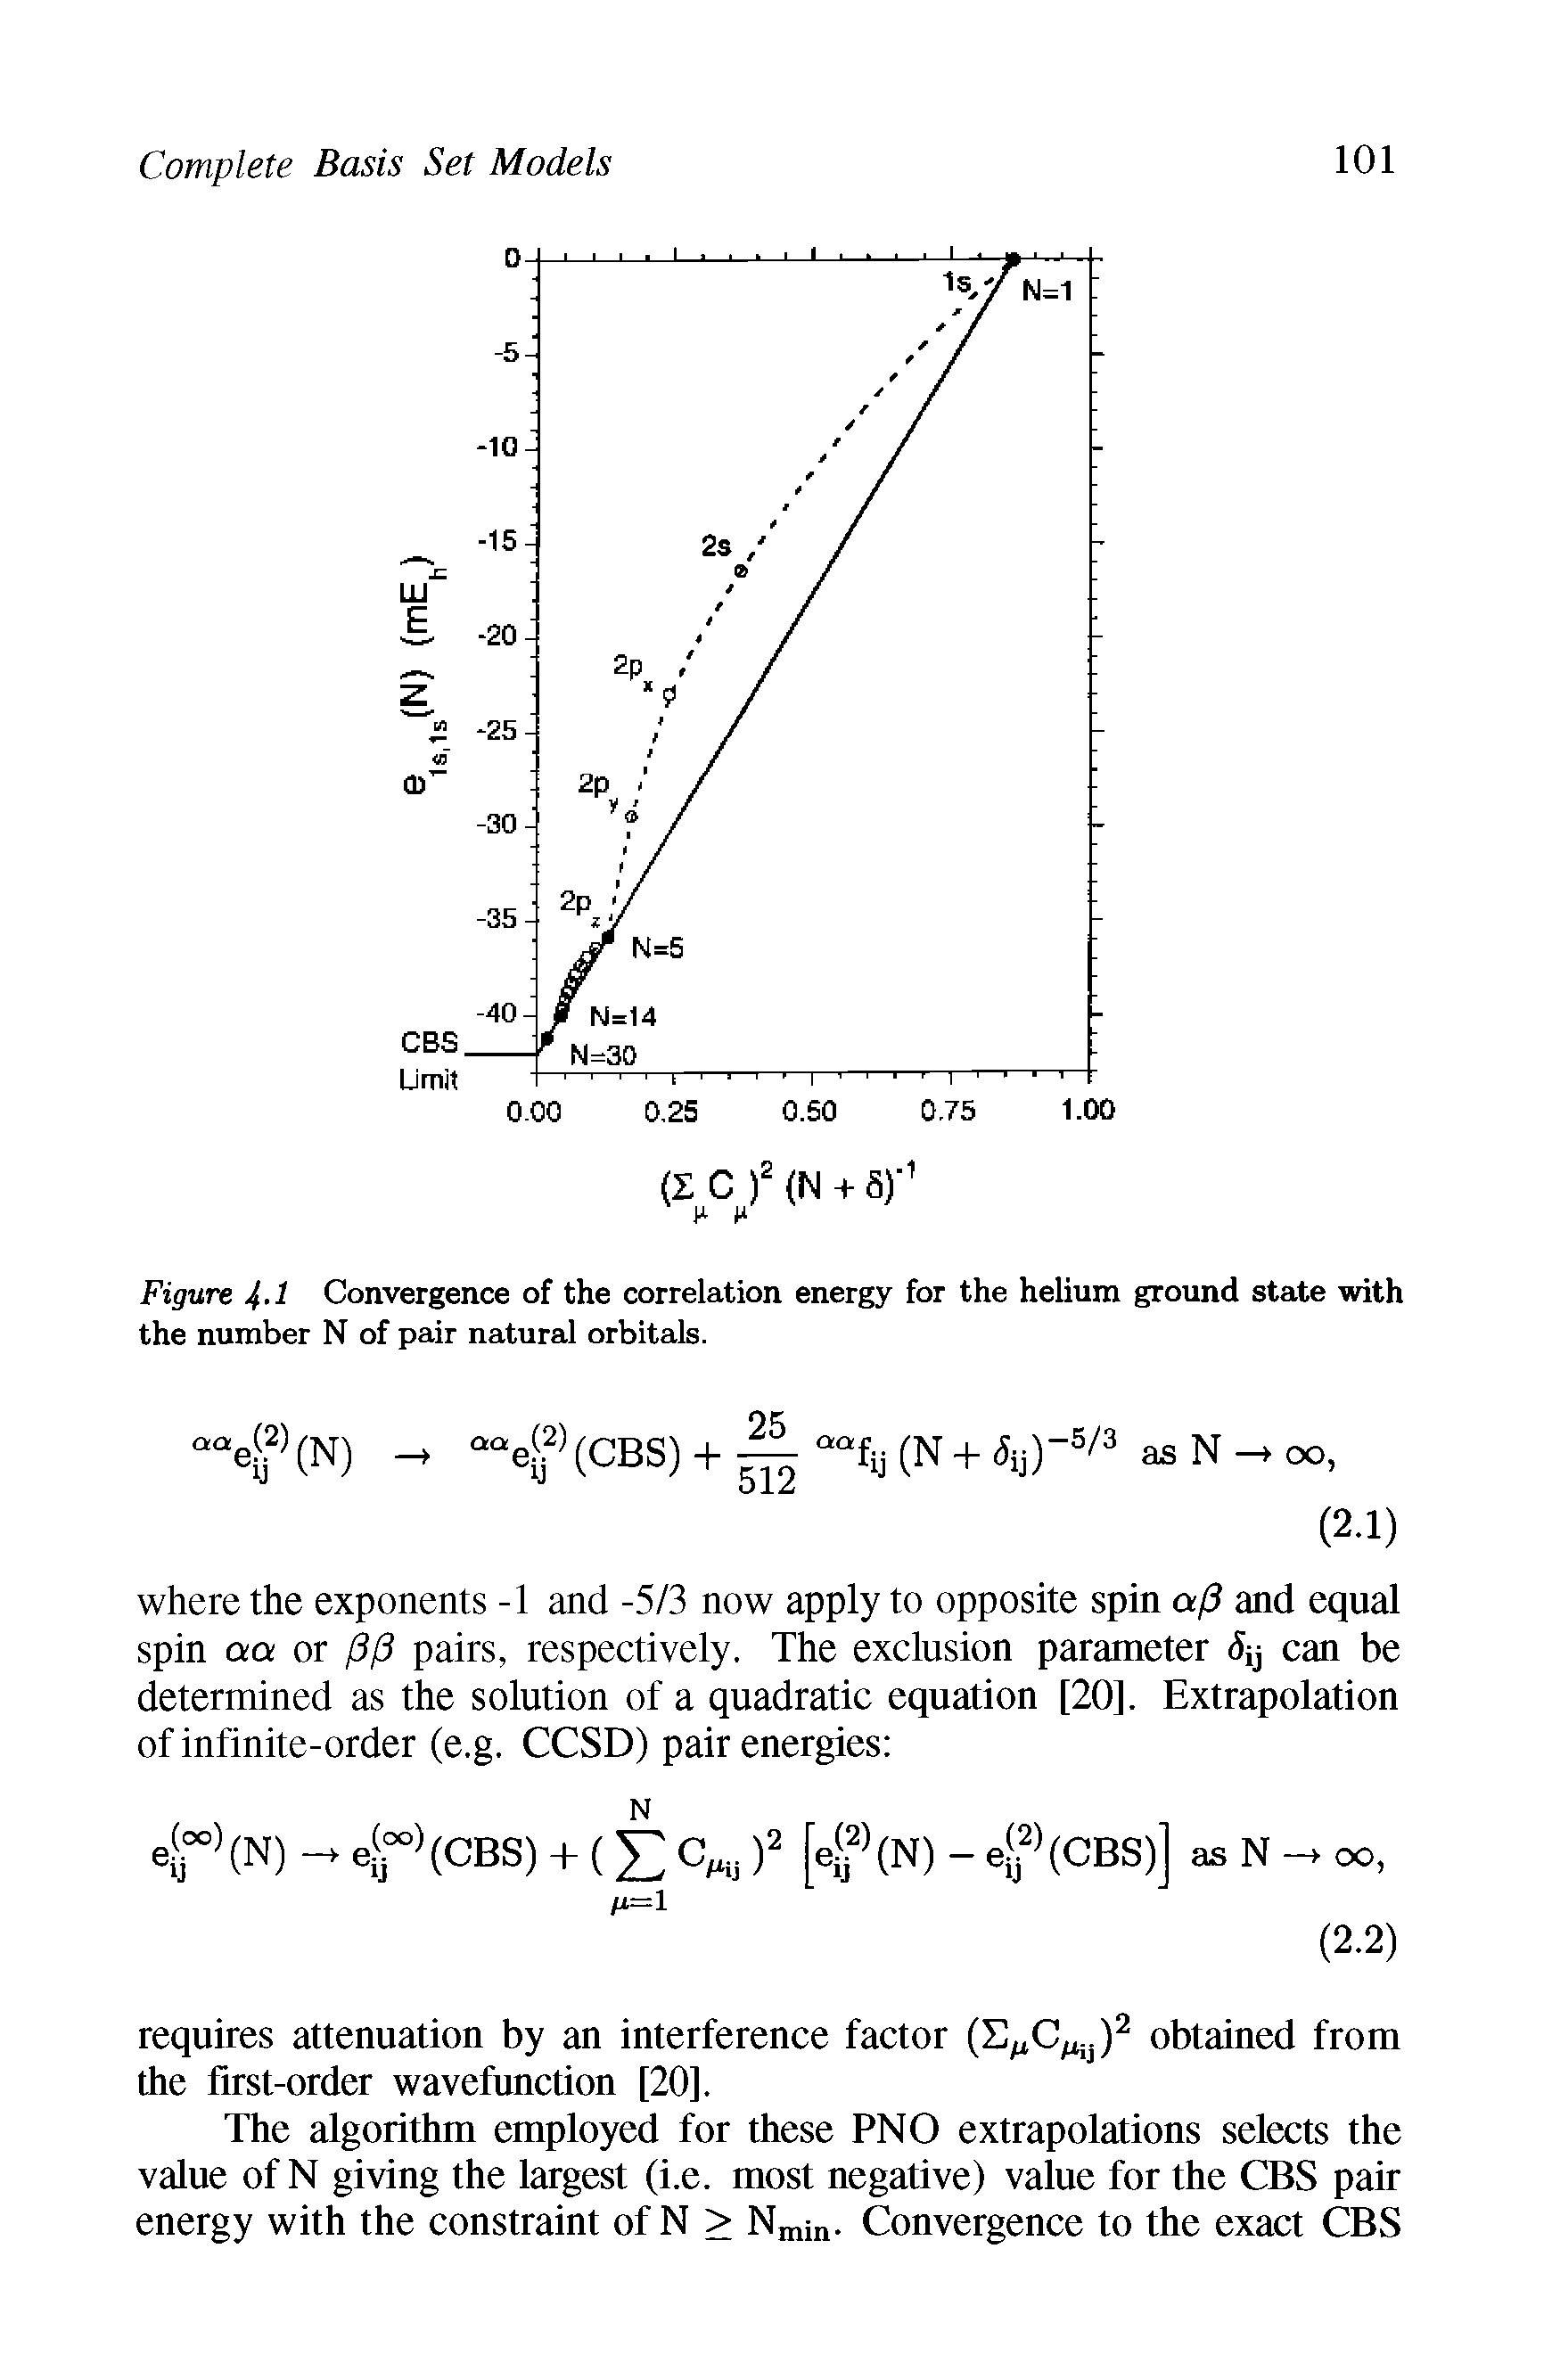 Figure 4-1 Convergence of the correlation energy for the helium ground state with the number N of pair natural orbitals.